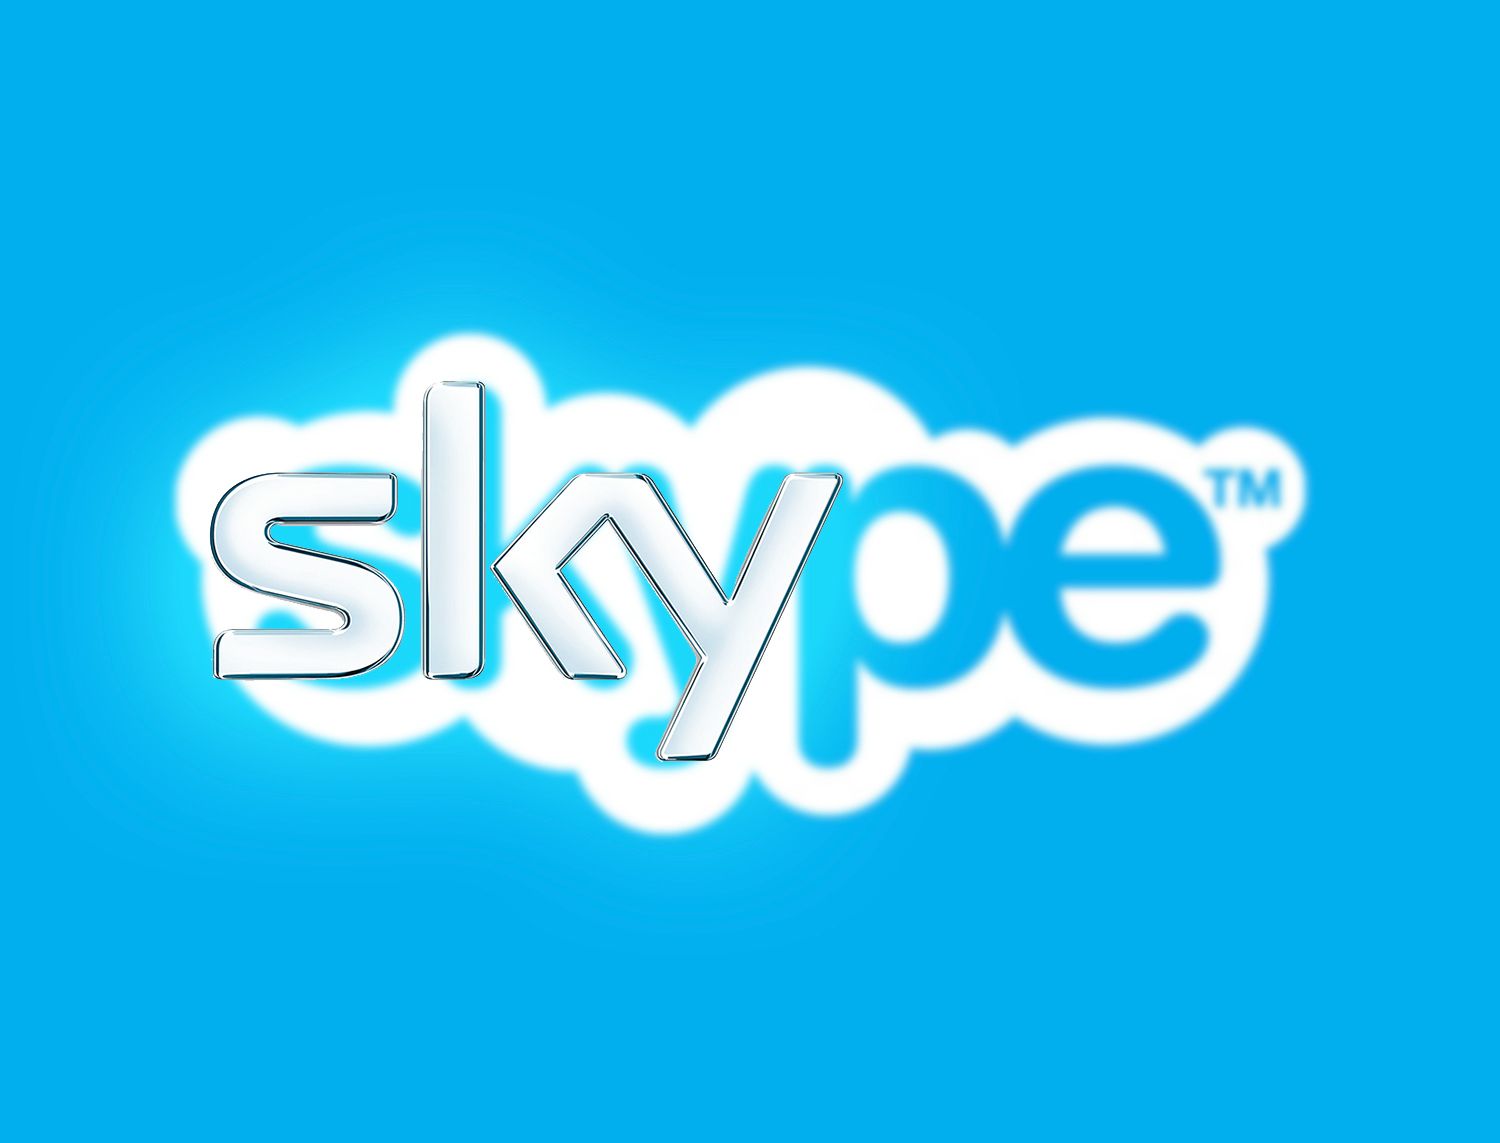 eu court thinks you ll confuse skype with sky rules name and logo are too similar image 1